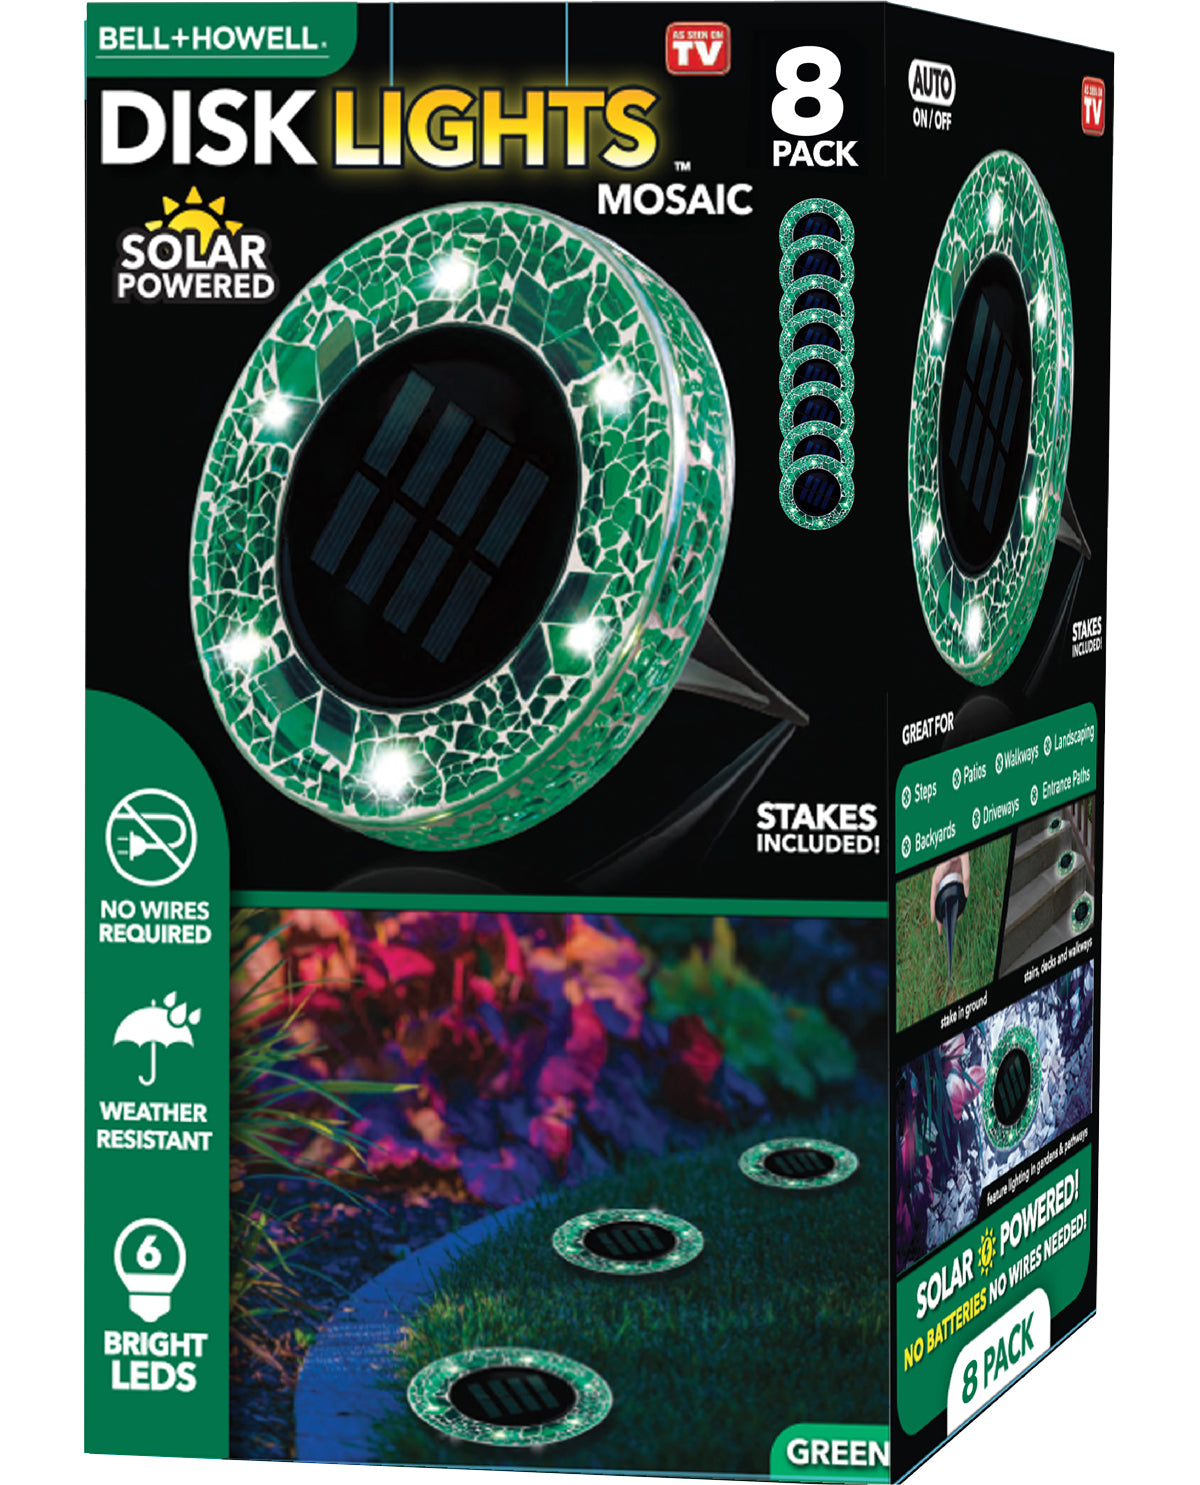 Bell+Howell Solar Powered Disk Lights with Green Mosaic Glass (4-Pack)